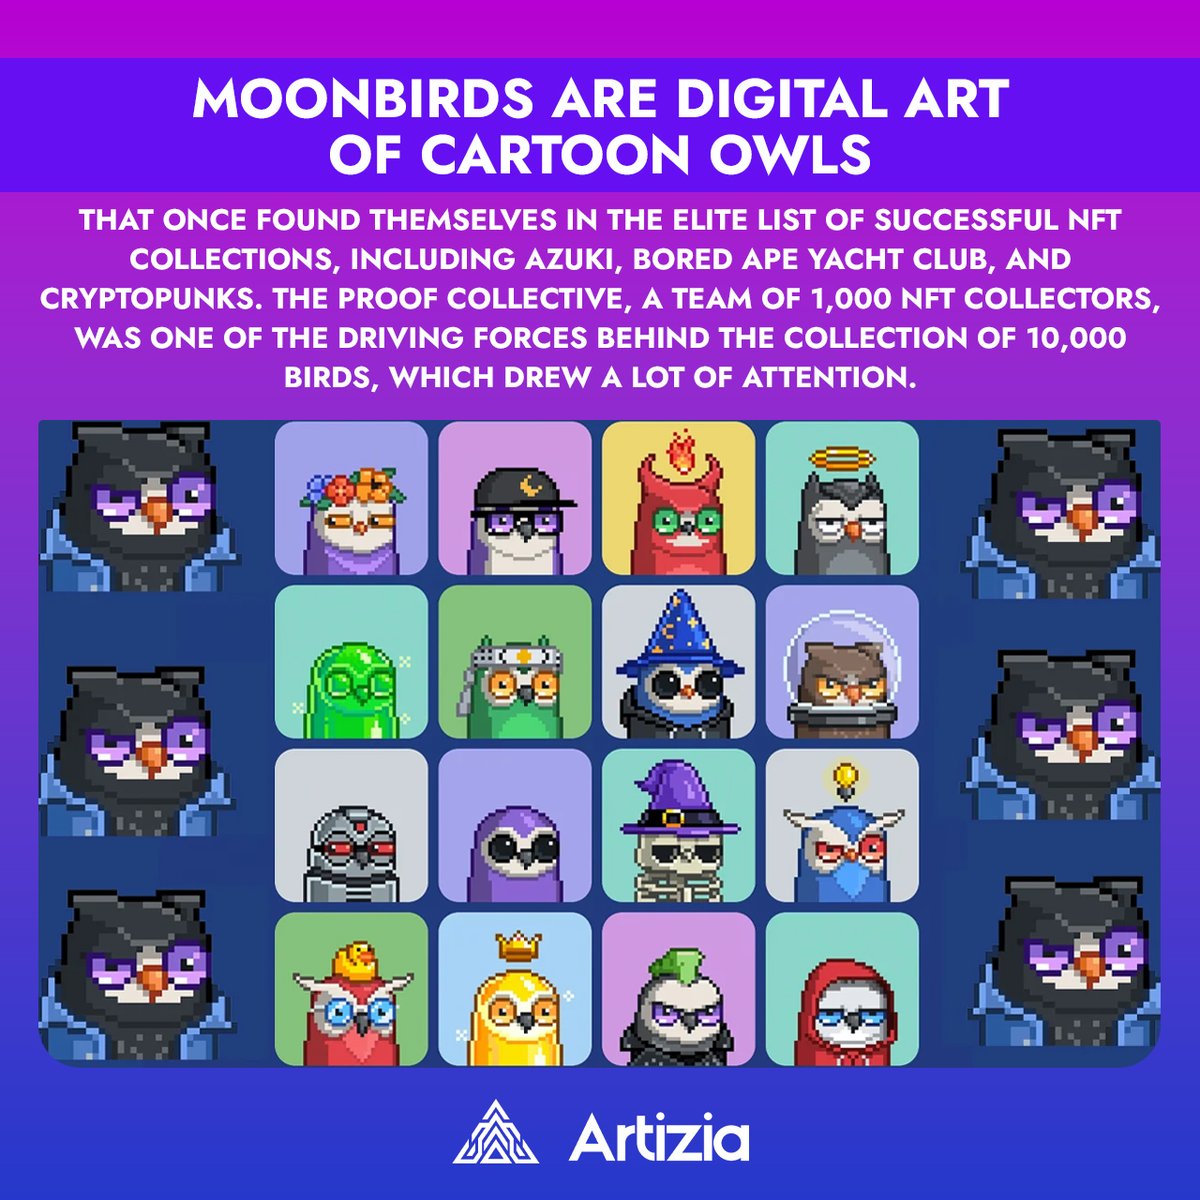 🦉✨ Hoot hoot! Moonbirds join the ranks of the NFT elite with Azuki & BAYC, thanks to the mighty ProofCollective. A digital art sensation of 10K owls, they're a hoot in the NFT World! 🌌🎨 
.
.
.
#NFTCommunity #DigitalArt #NFTCollectors #VirtualArt #TechArt #NFTWorld